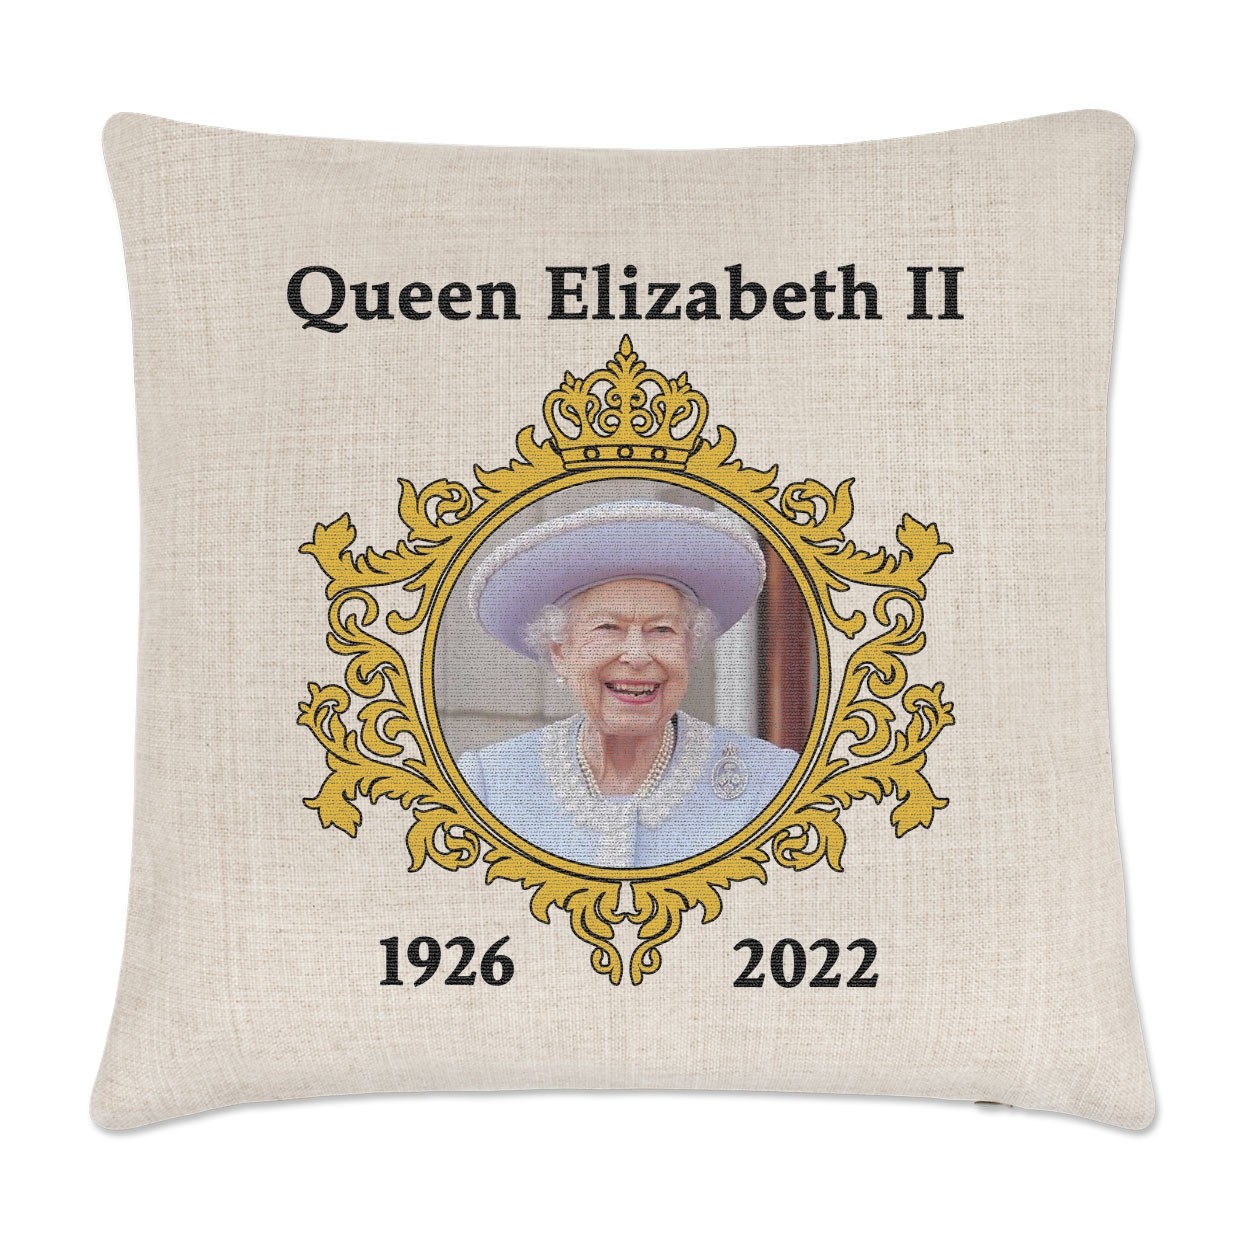 Queen Elizabeth II 1926 - 2022 Cushion Cover Commemorative Gift Her Majesty